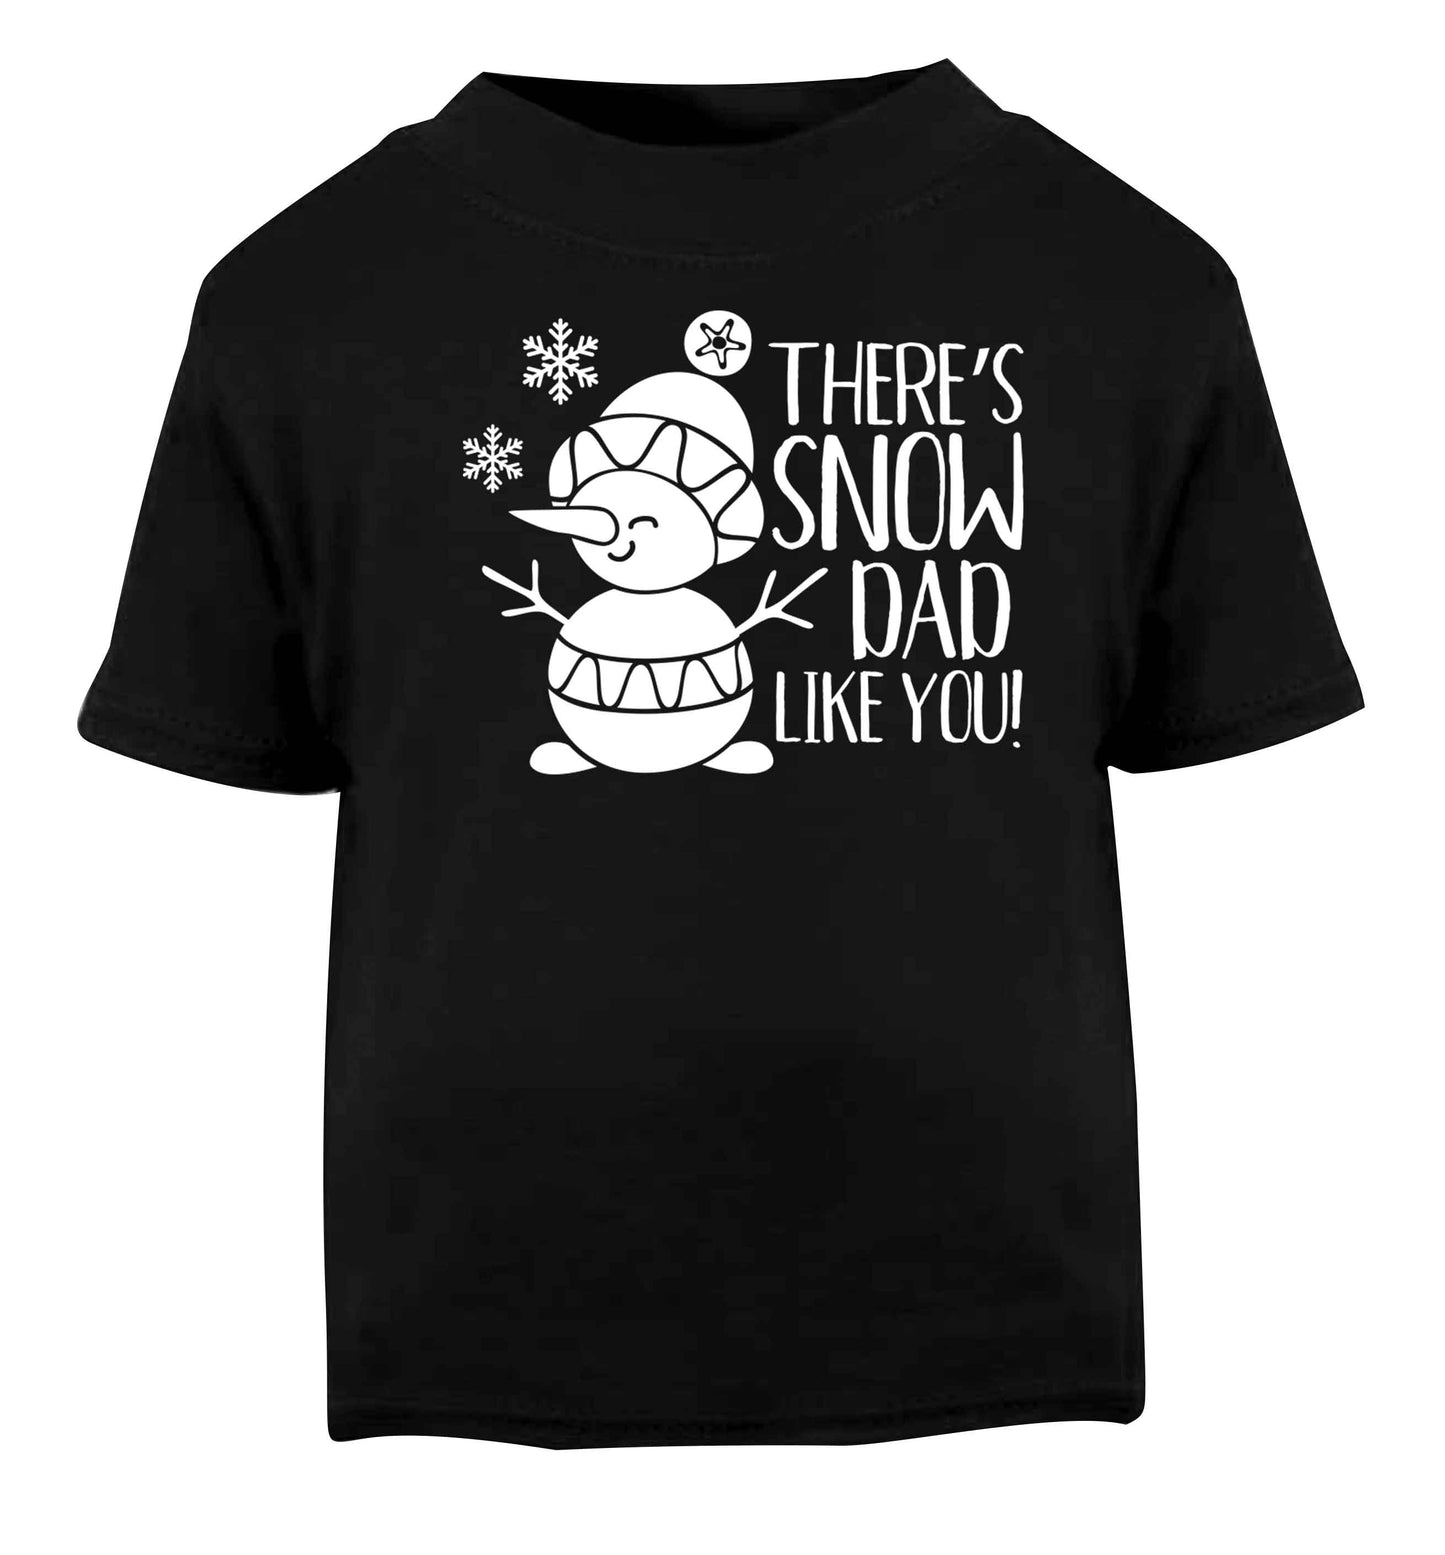 There's snow dad like you Black baby toddler Tshirt 2 years